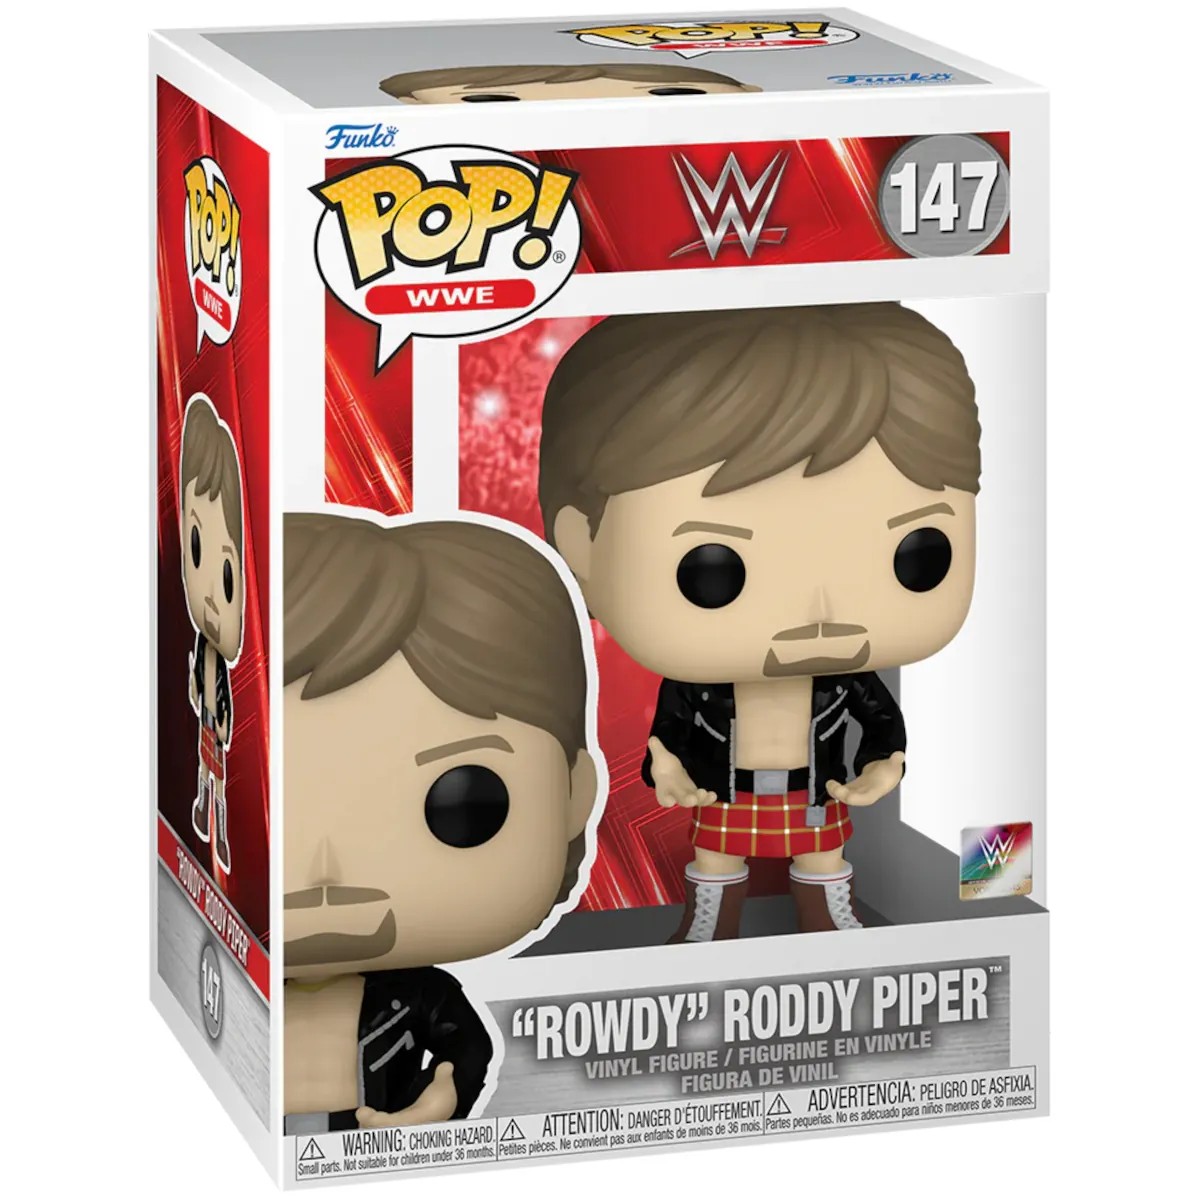 FK75101 Funko Pop! WWE - Rowdy Roddy Piper Collectable Vinyl Figure Box Front